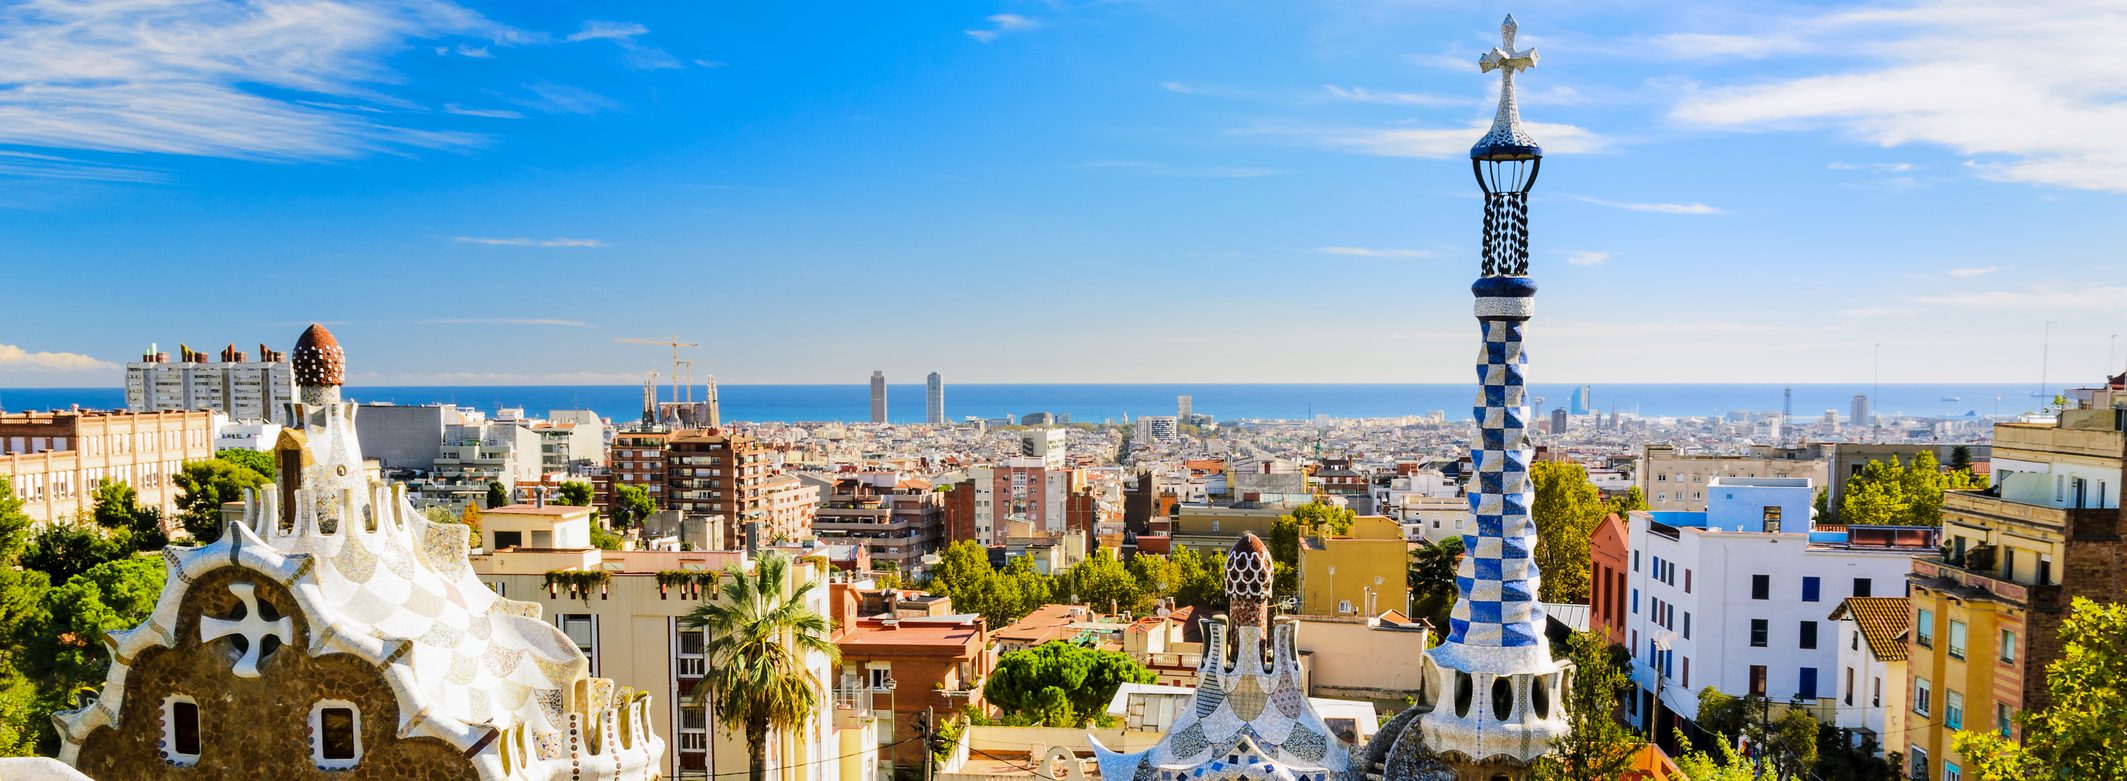 Flights to Spain in the $300s & $400s round-trip